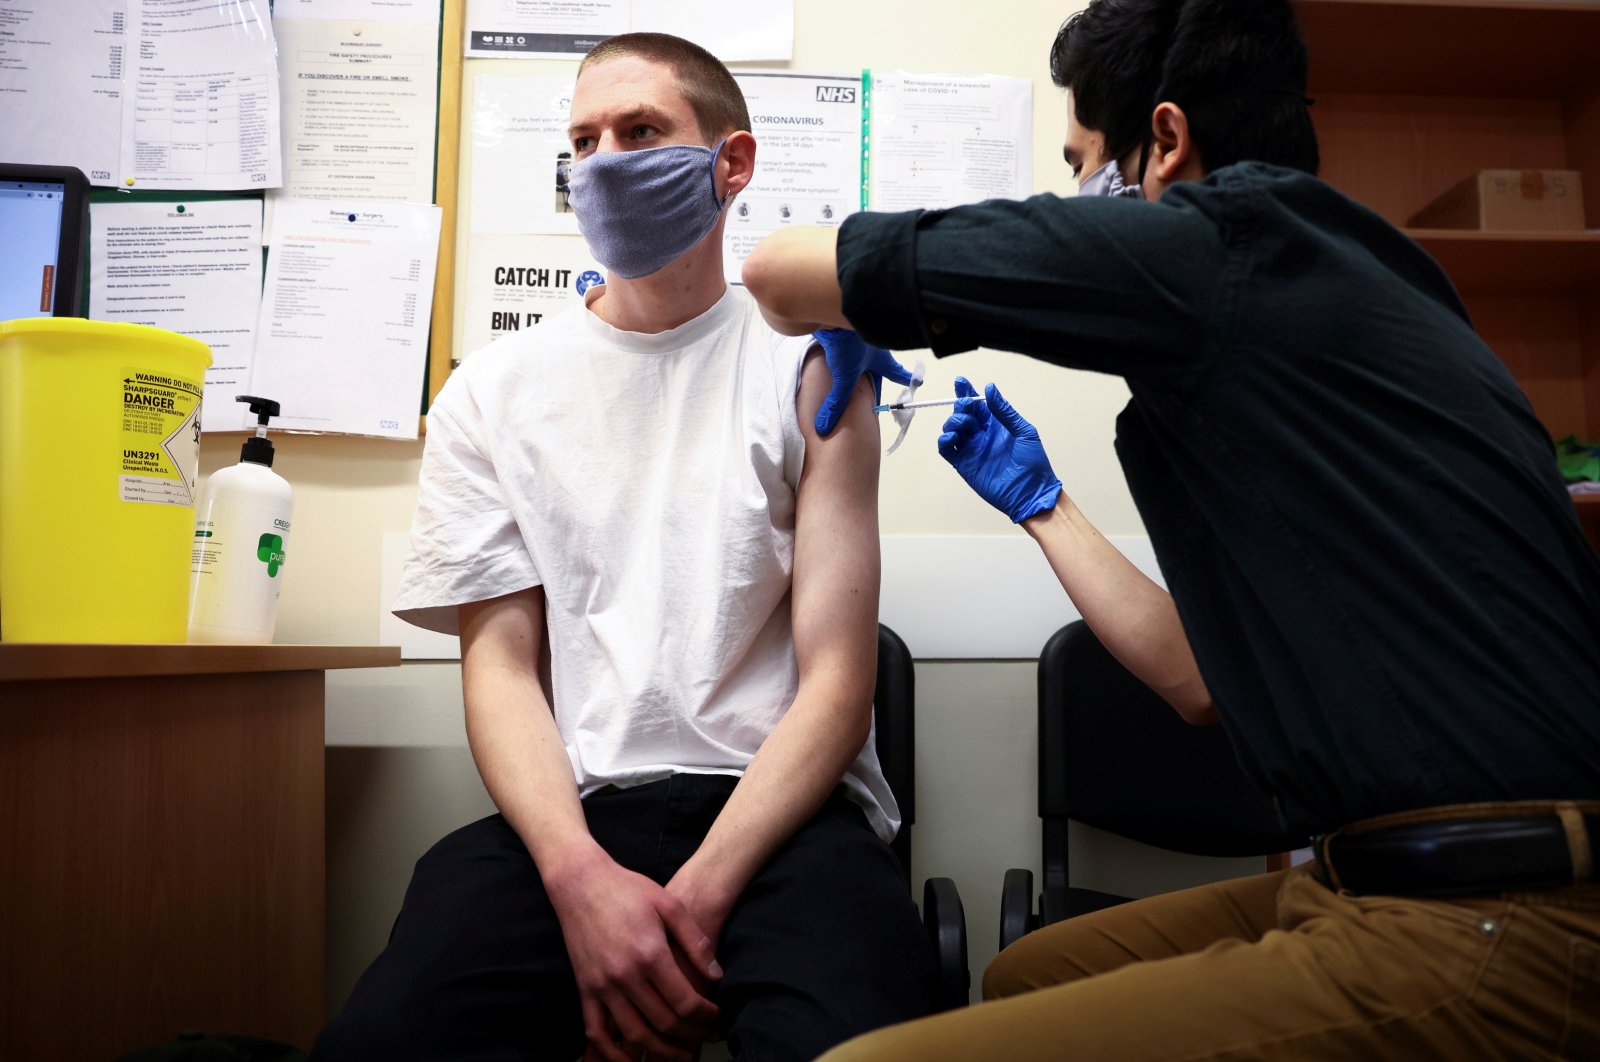 A person receives a dose of the Pfizer BioNTech COVID-19 vaccine at a vaccination center for young people and students at the Hunter Street Health Center in London, U.K., June 5, 2021. (Reuters Photo)